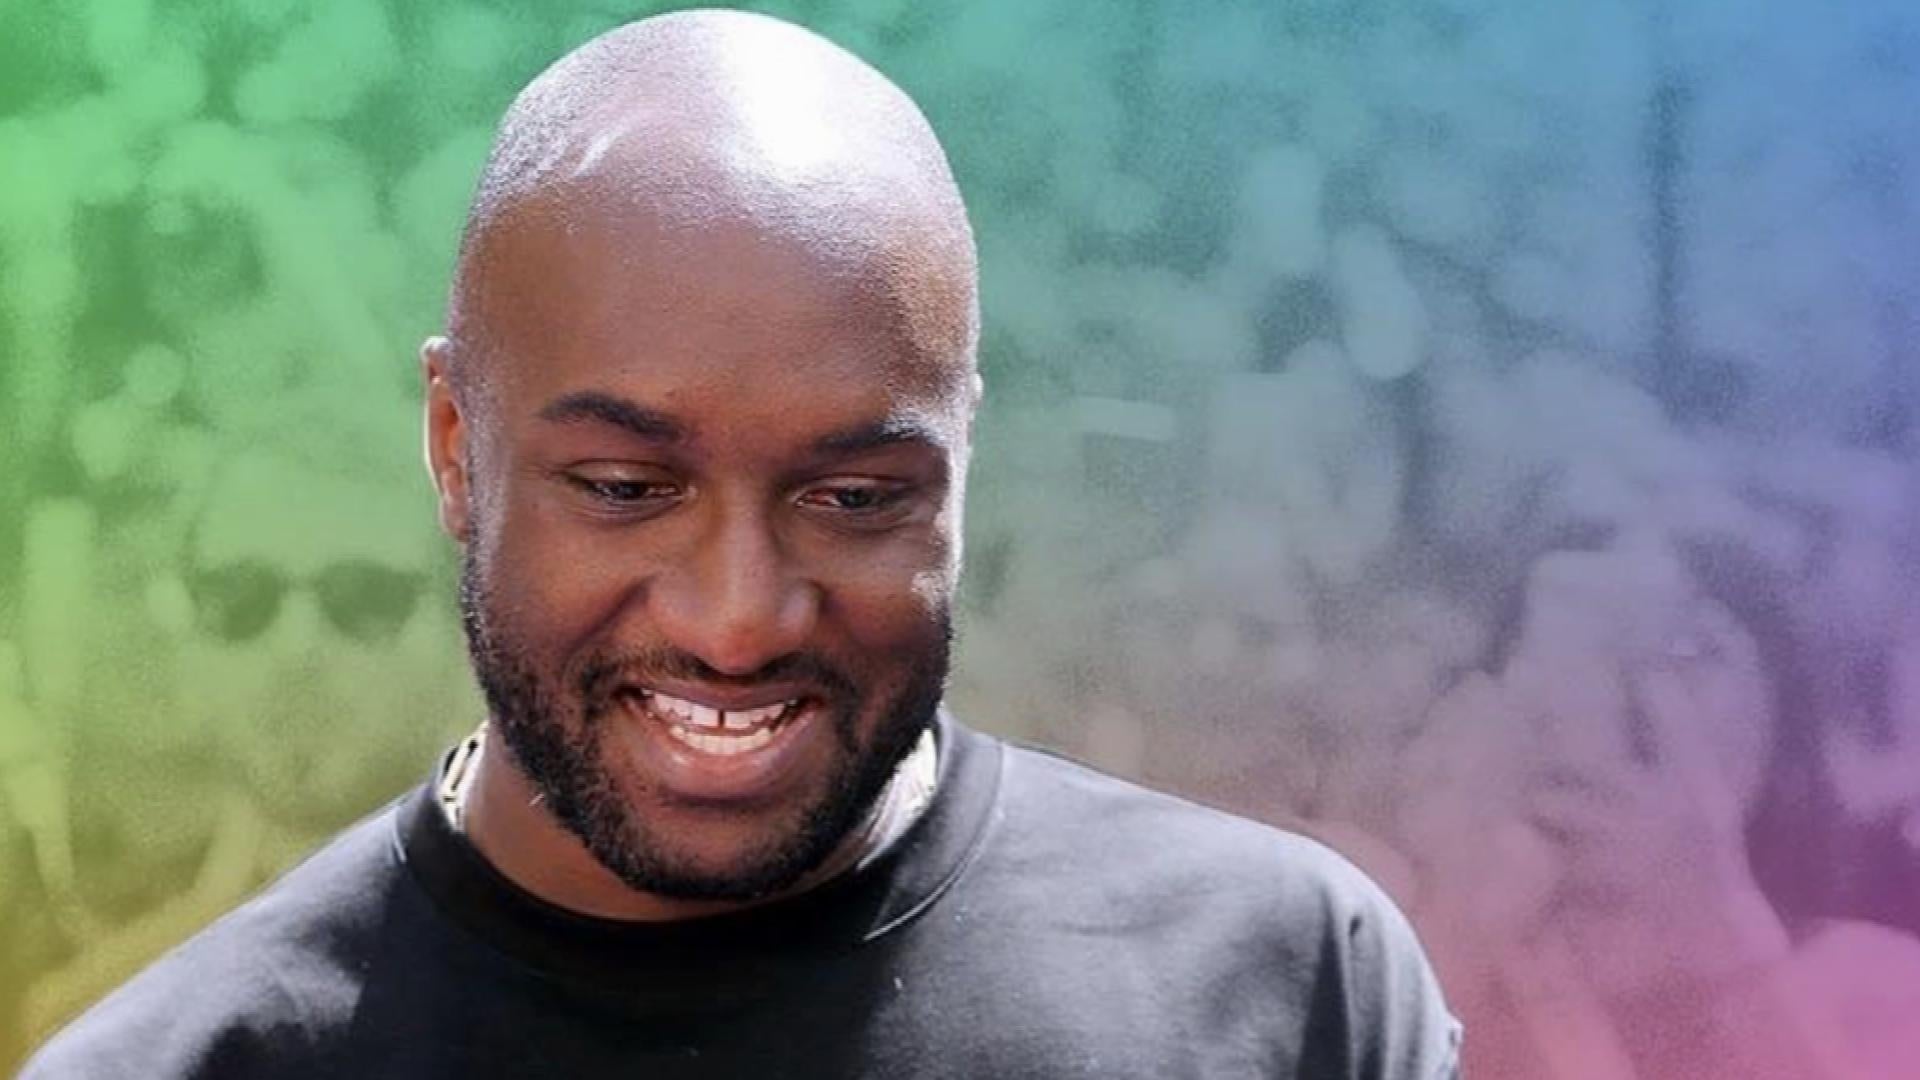 Virgil Abloh death news: Louis Vuitton's creative director Virgil Abloh  succumbs to cancer at 41; LVMH pays tribute - The Economic Times